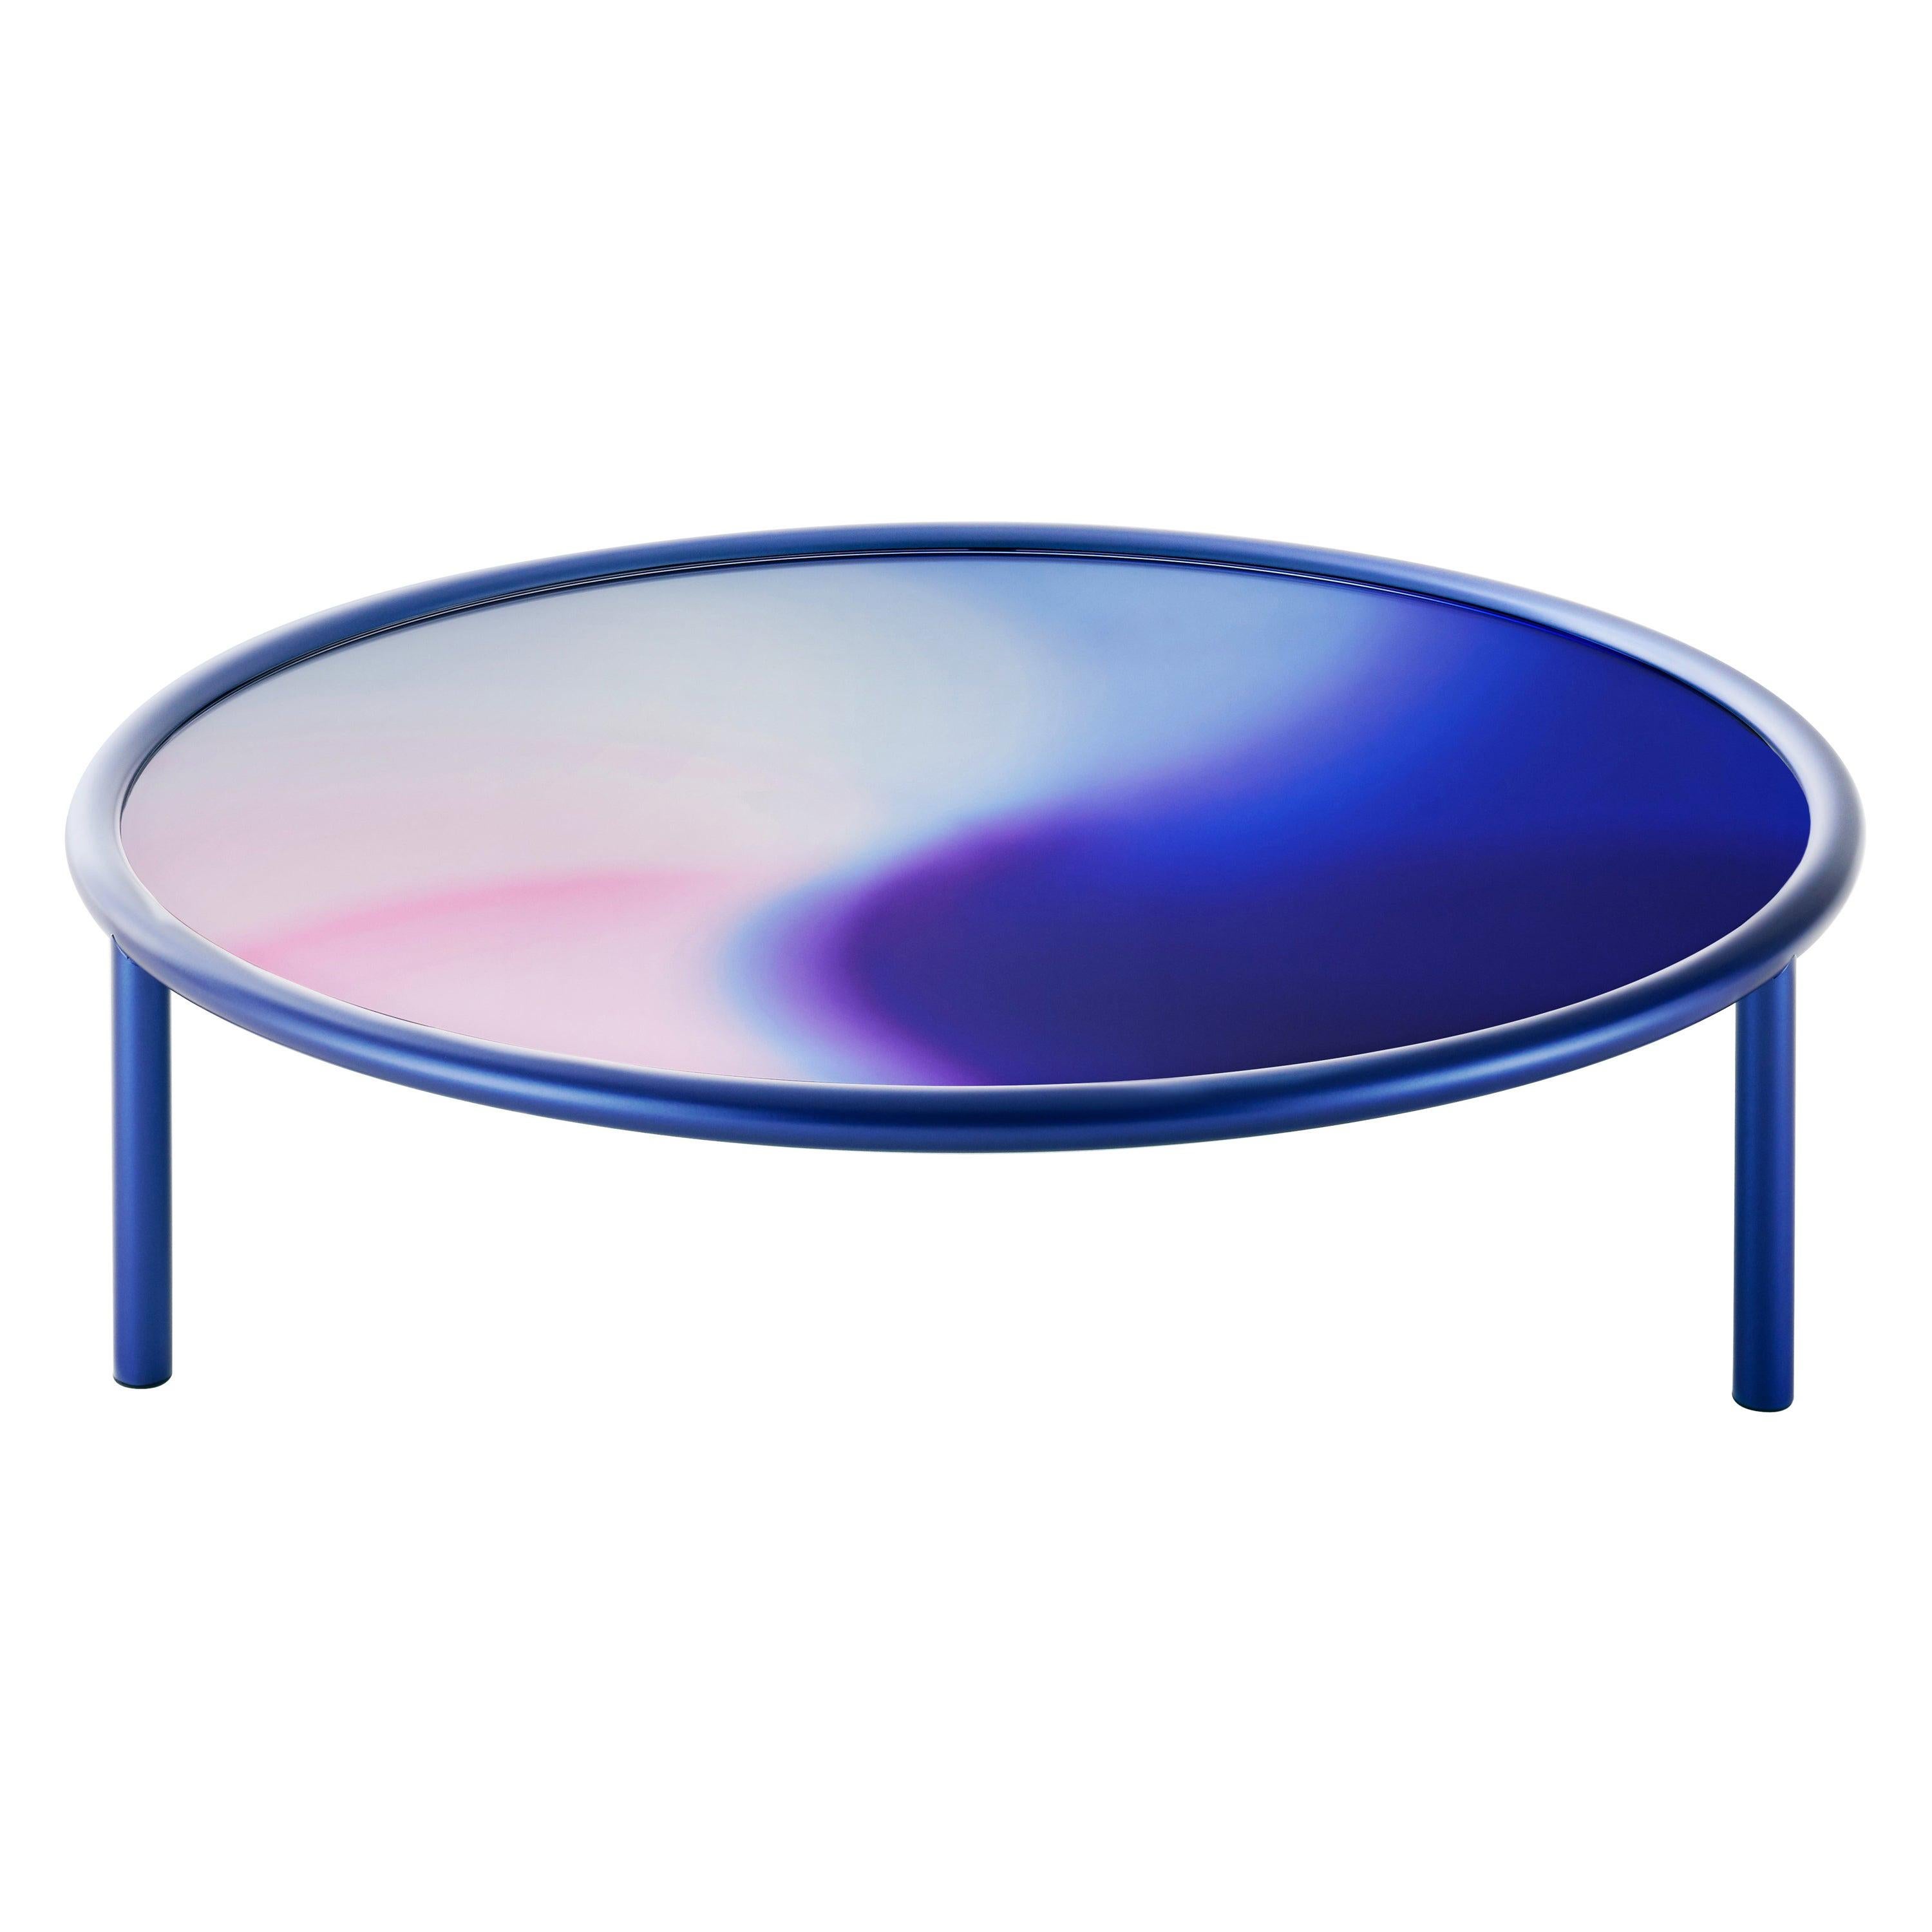 L.A. SUNSET Midnight Blue Table, by Patricia Urquiola, Glas Italia IN STOCK